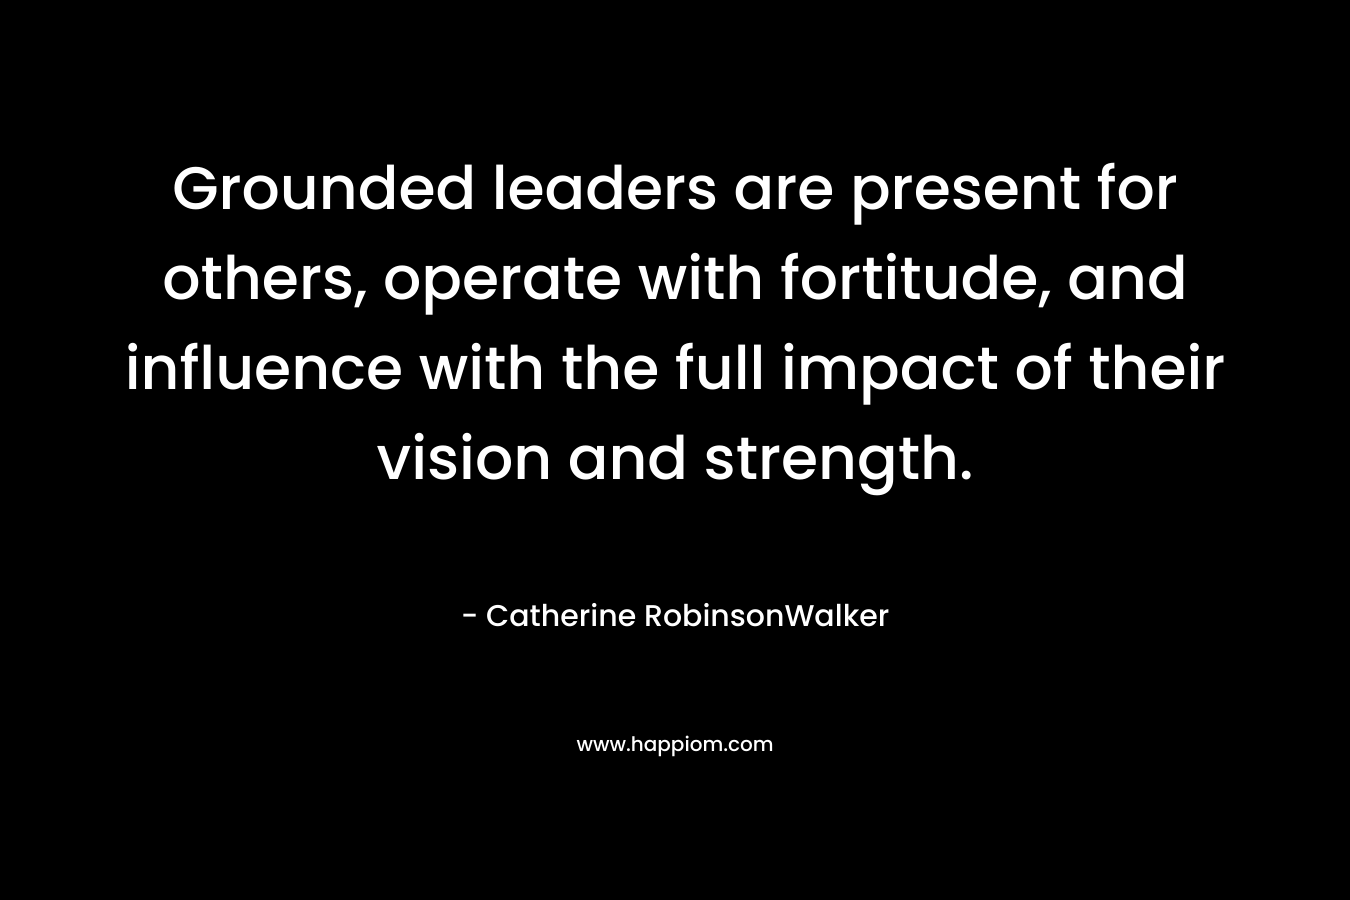 Grounded leaders are present for others, operate with fortitude, and influence with the full impact of their vision and strength. – Catherine RobinsonWalker